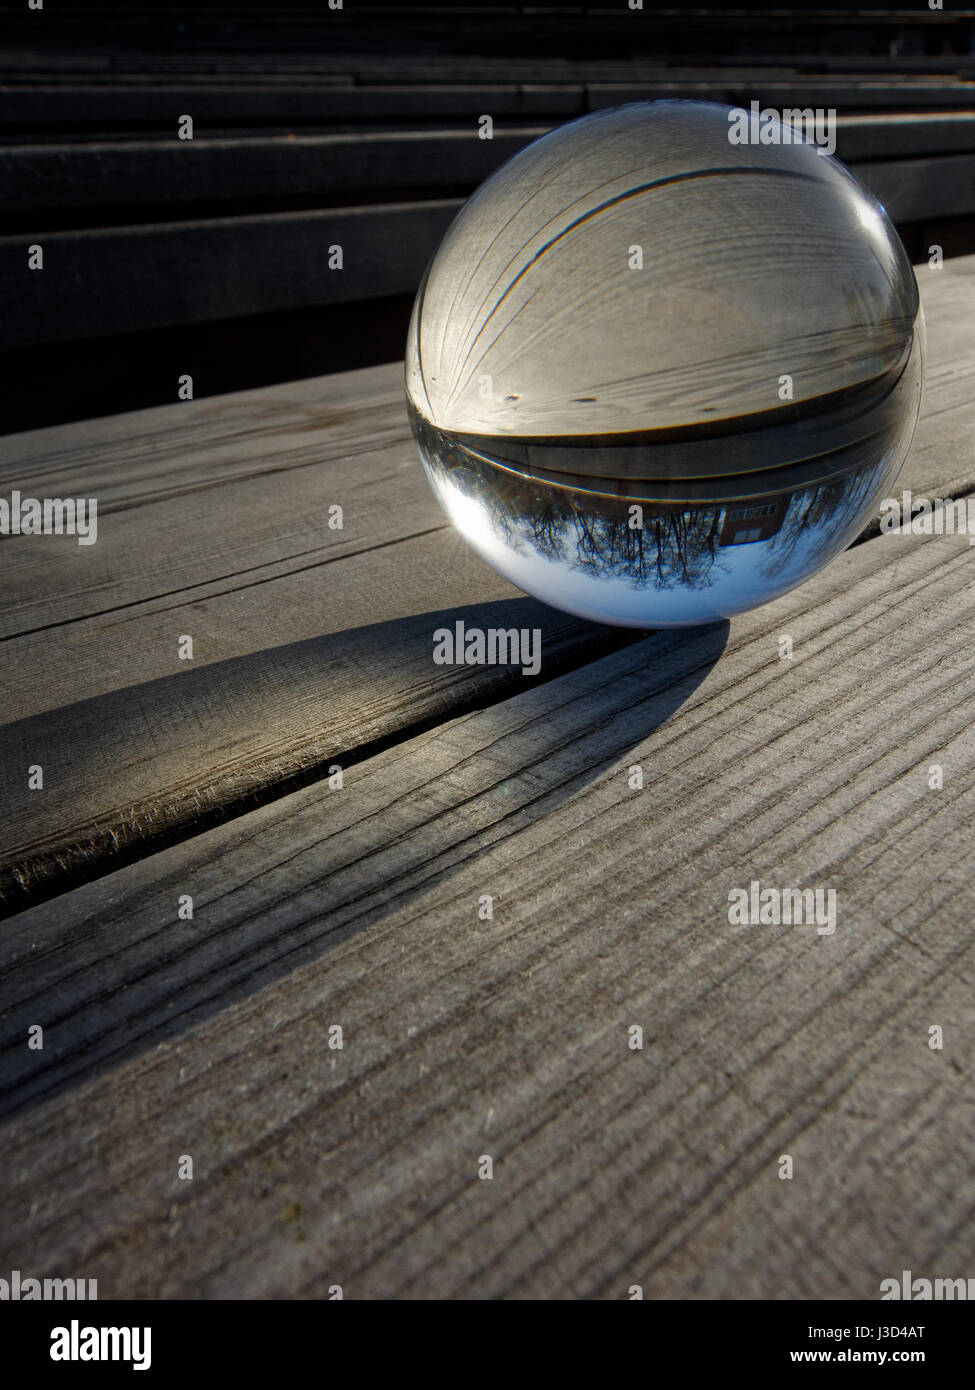 Backgrounds and textures: glass ball on a wooden table, part of a landscape inside Stock Photo